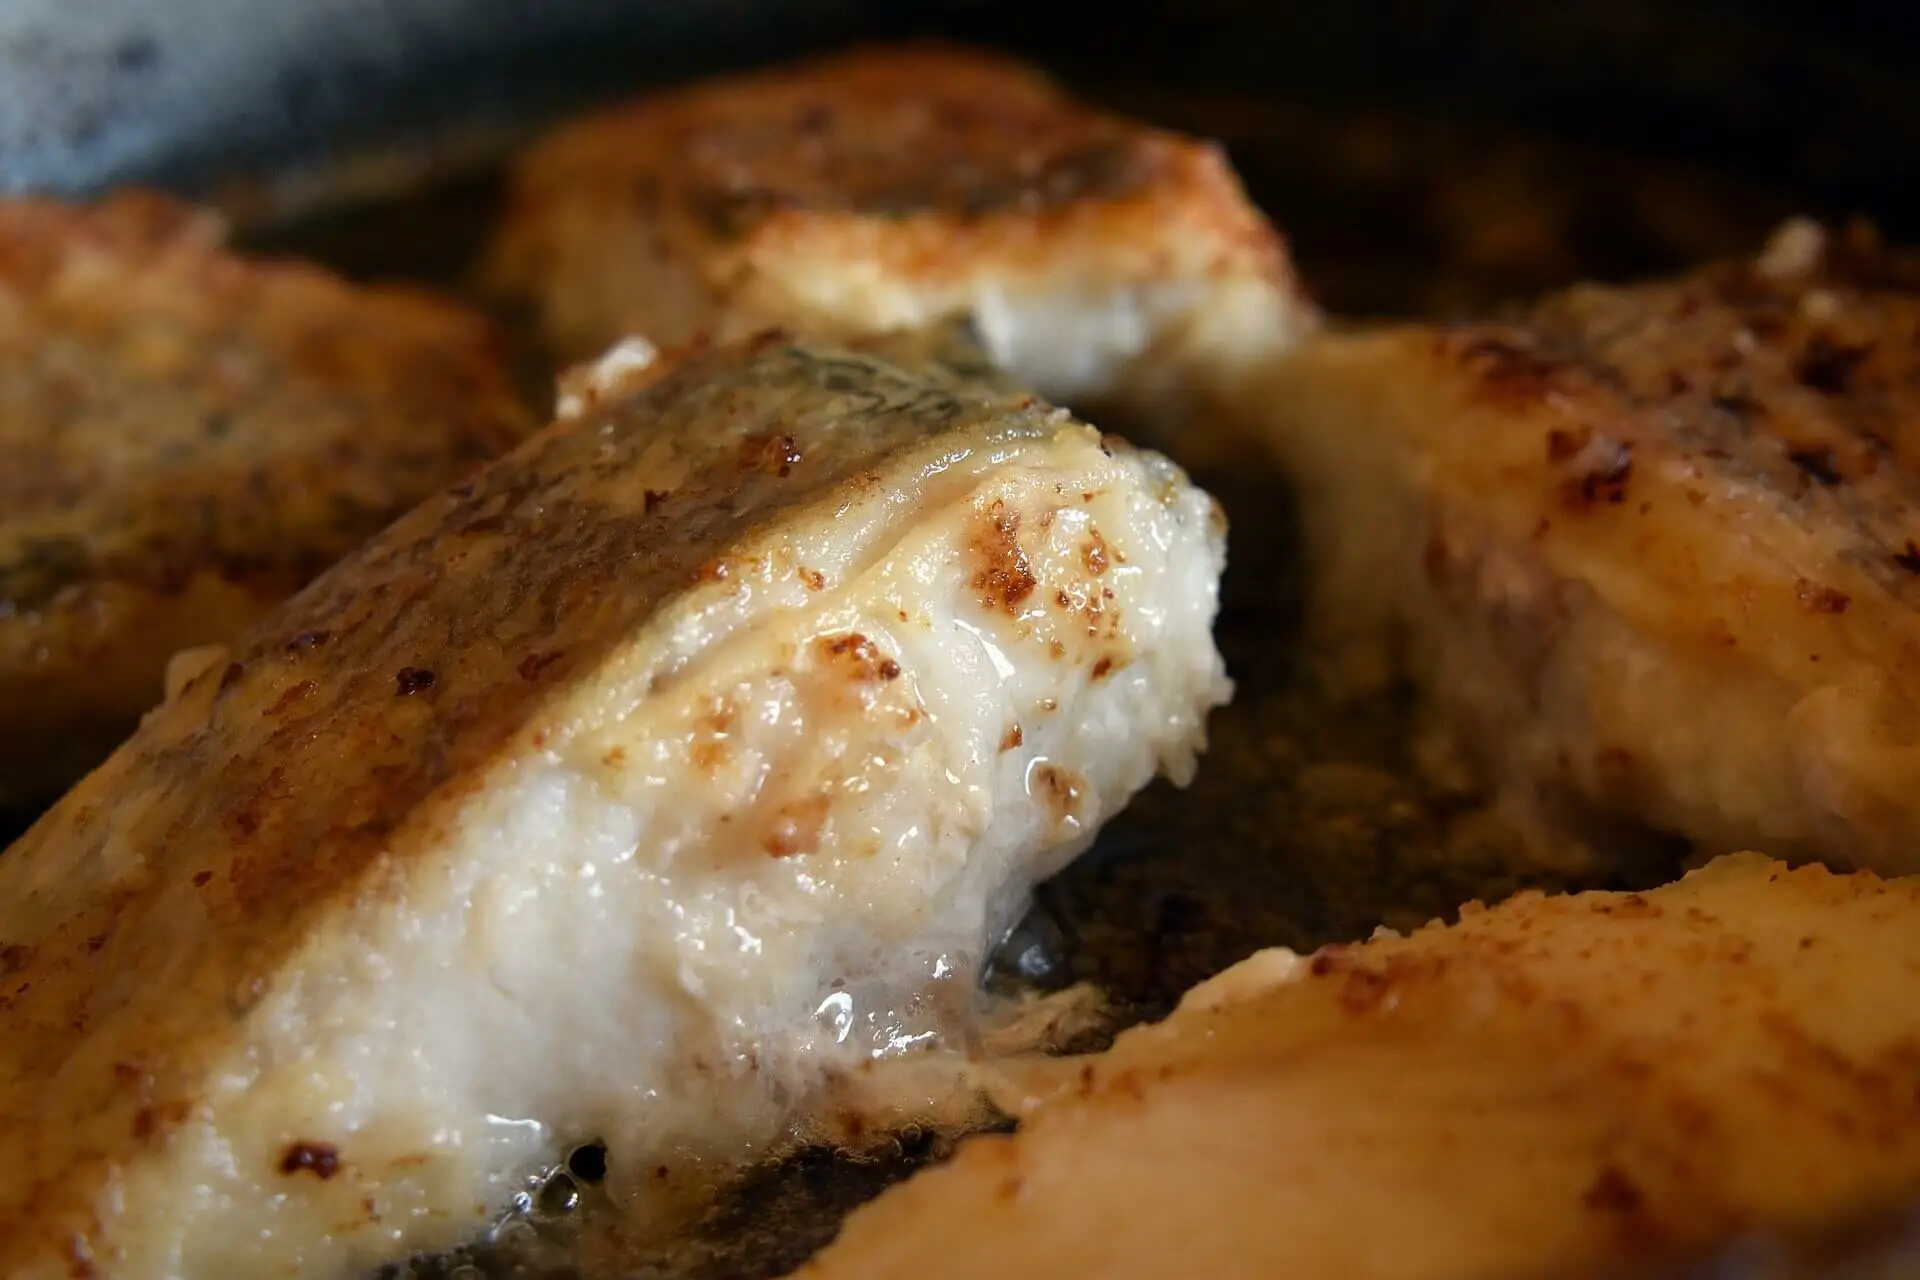 Can you eat Pike? Yes, grilled pike is an excellent and delicious dish that's easy to prepare